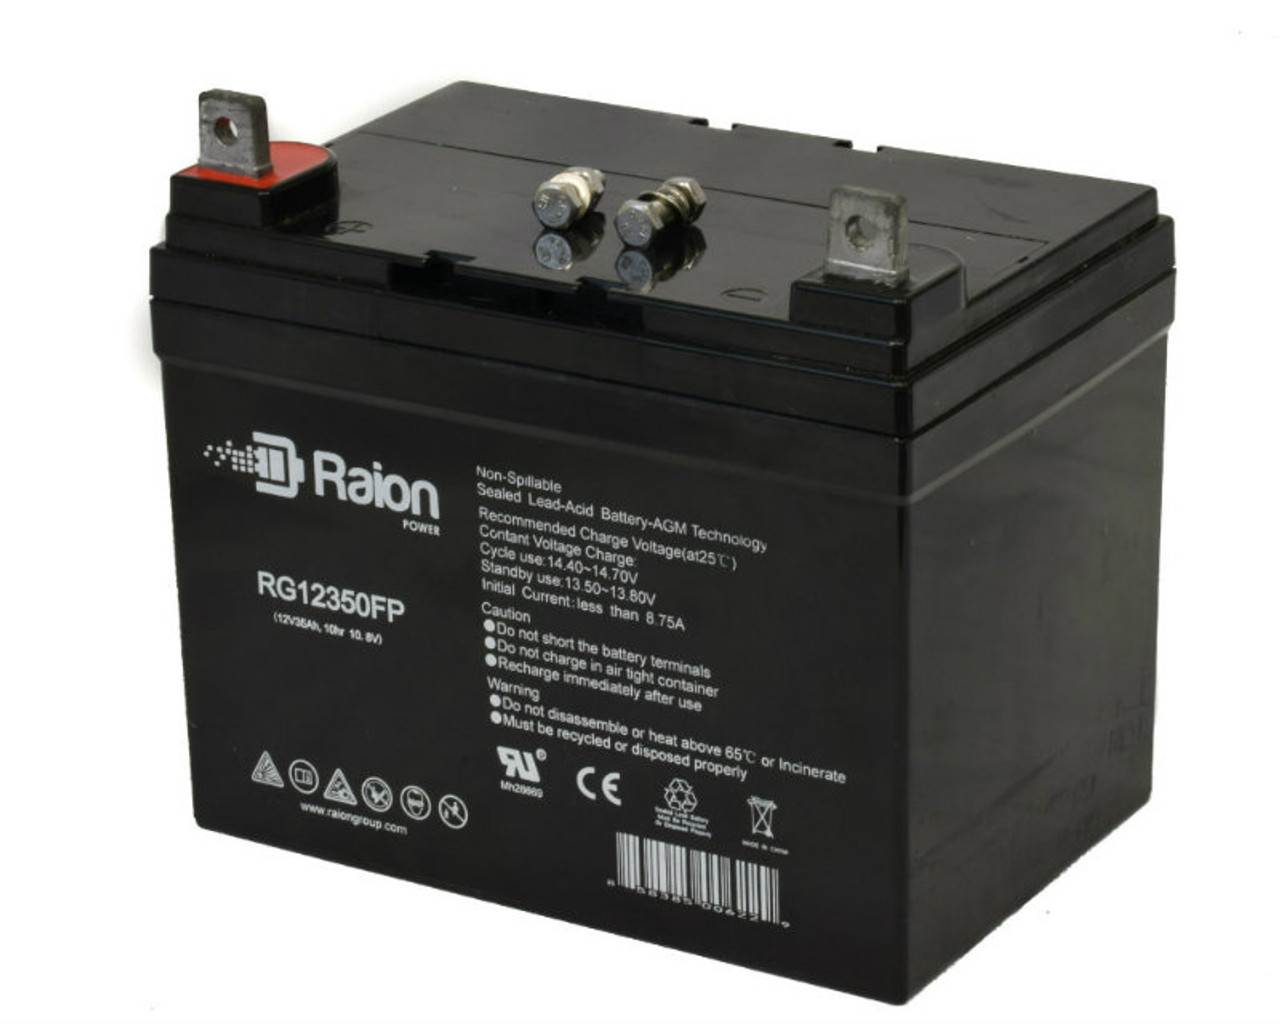 Raion Power Replacement 12V 35Ah RG12350FP Mobility Scooter Battery for Merits Health Products P171 (Travel Ease)